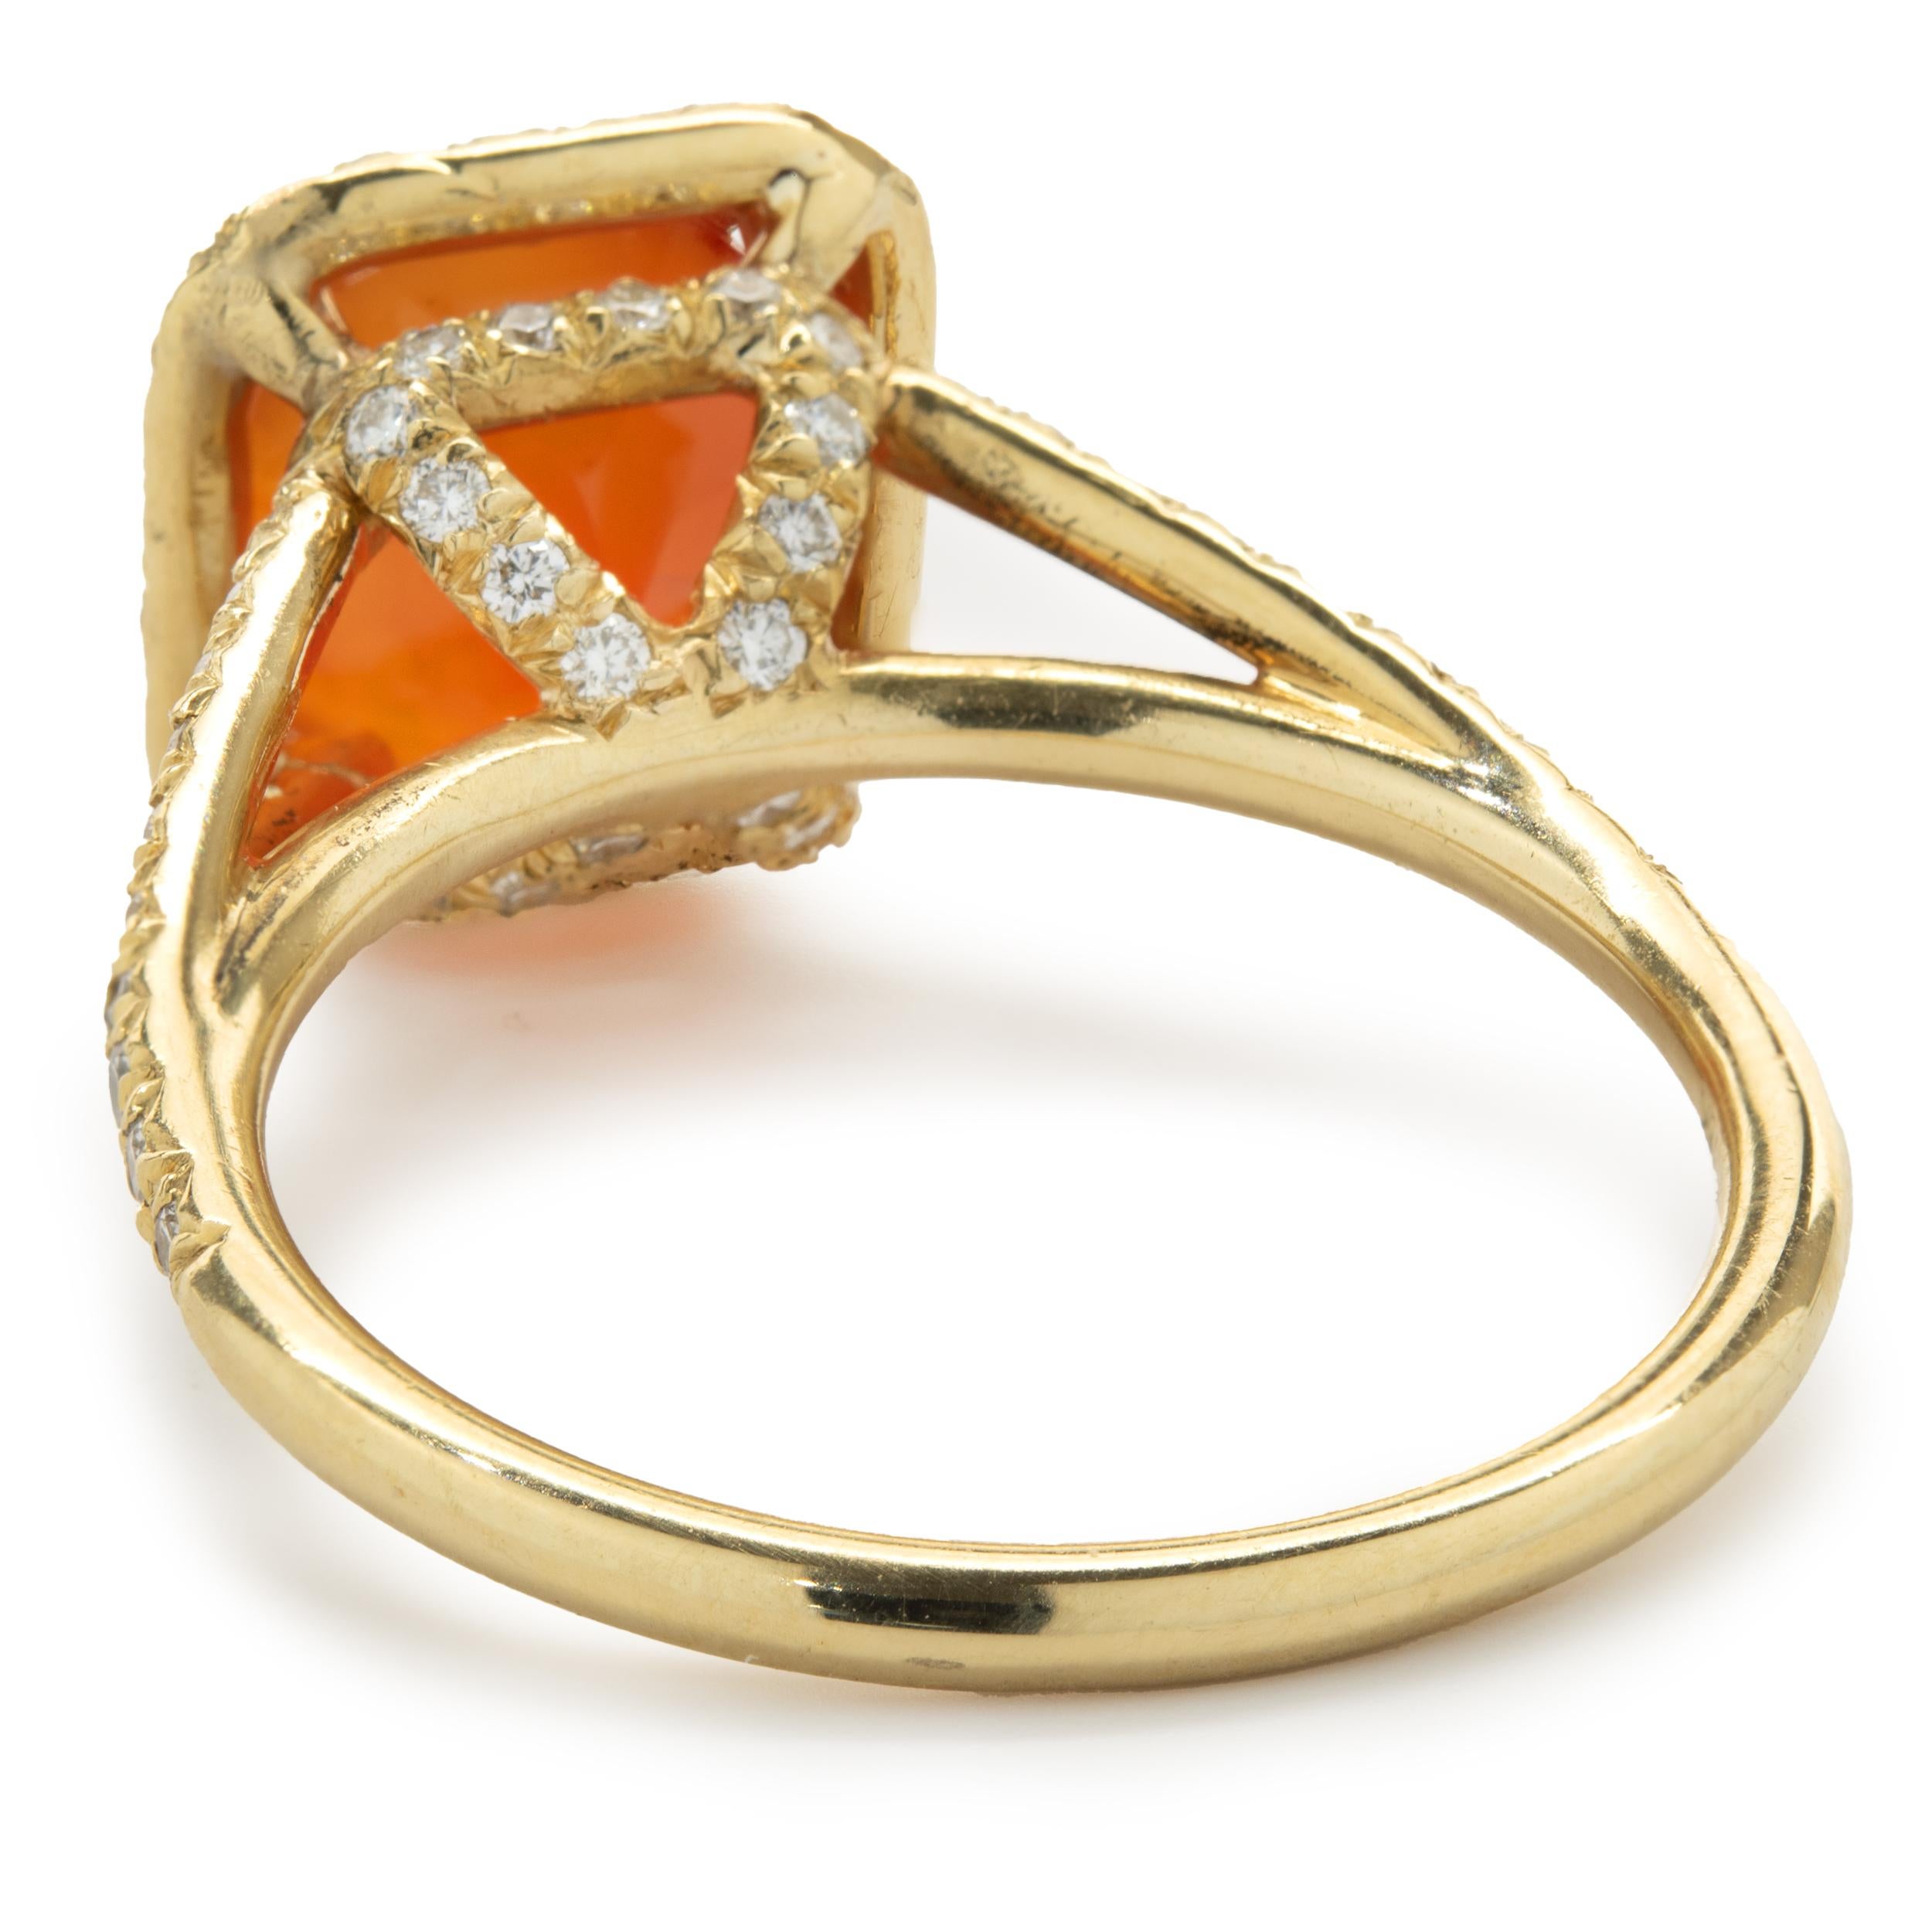 18 Karat Yellow Gold Mexican Fire Opal and Diamond Ring In Excellent Condition For Sale In Scottsdale, AZ